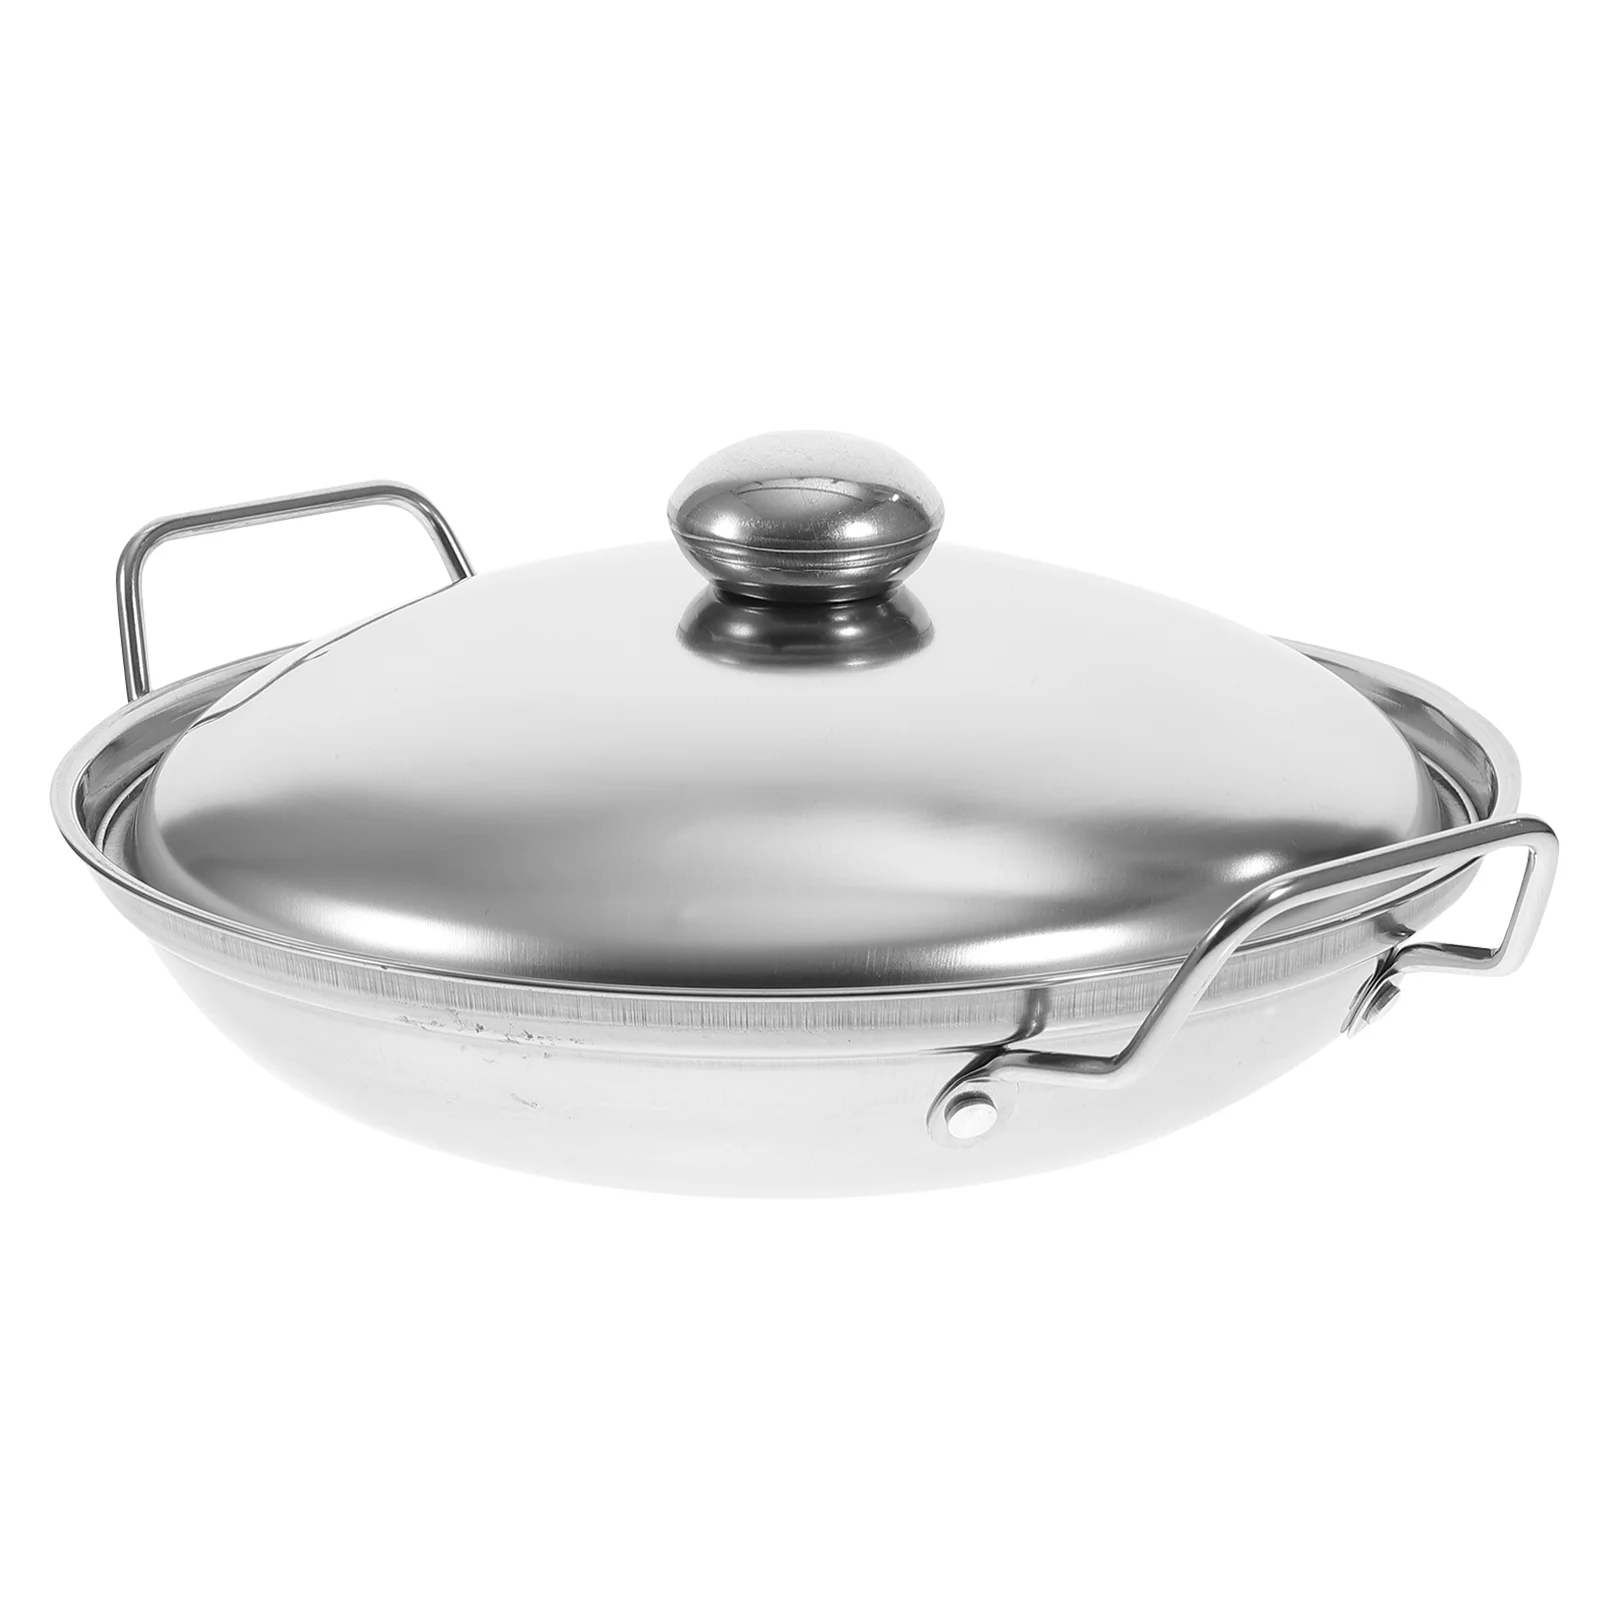 

Pot Pan Wok Hot Cooking Stove Steel Stainless Gas Soup Fry Kitchen Omelette Sauce Pasta Noodle Stir Nonstick Cookware Cooker